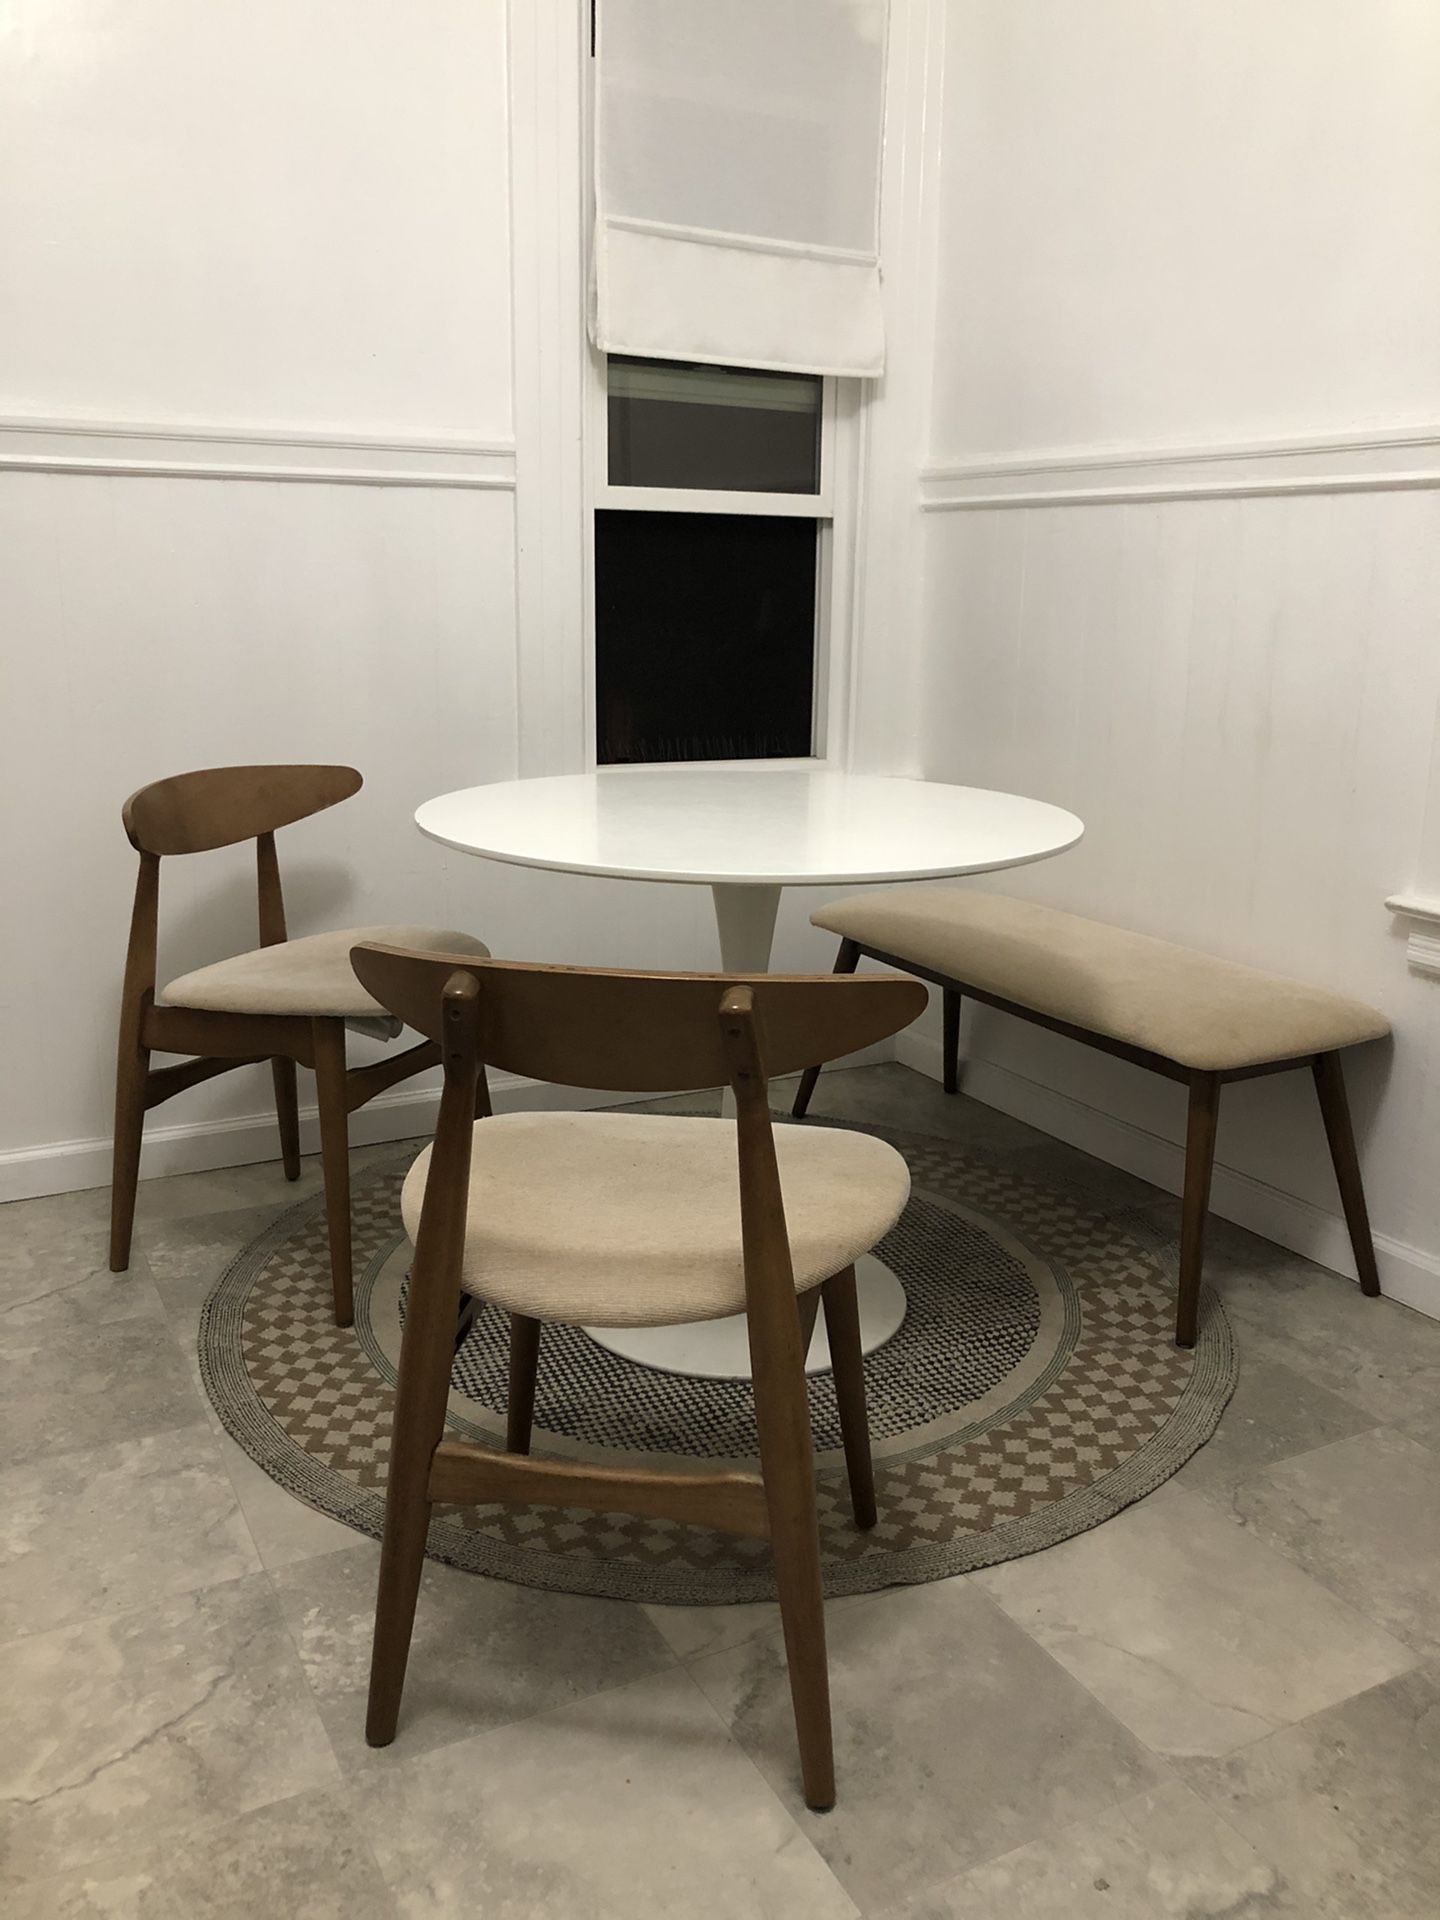 White circular dining table (free chairs, bench and rug - optional)